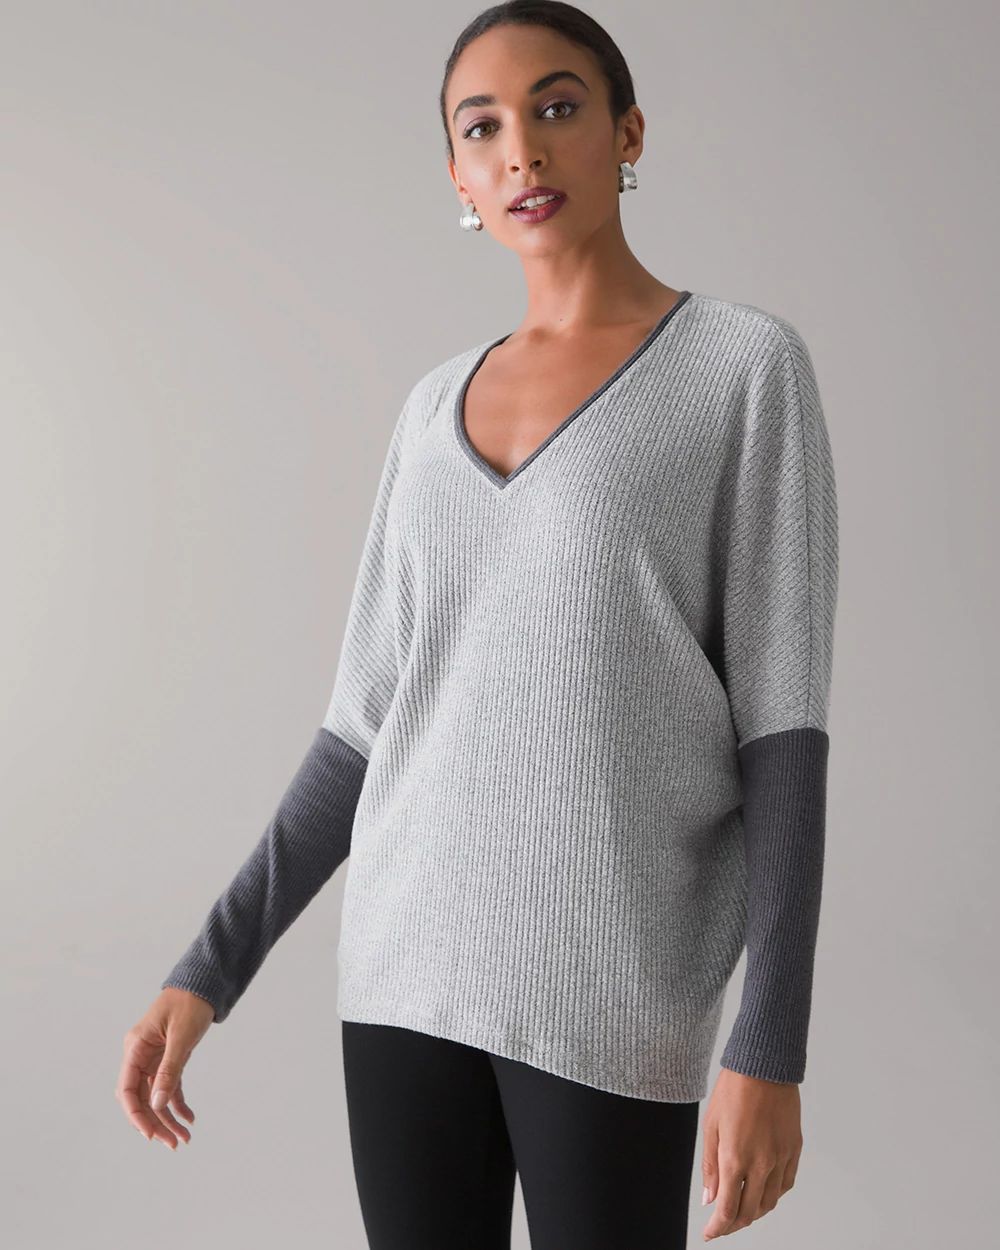 Petite Ribbed Dolman Tunic click to view larger image.